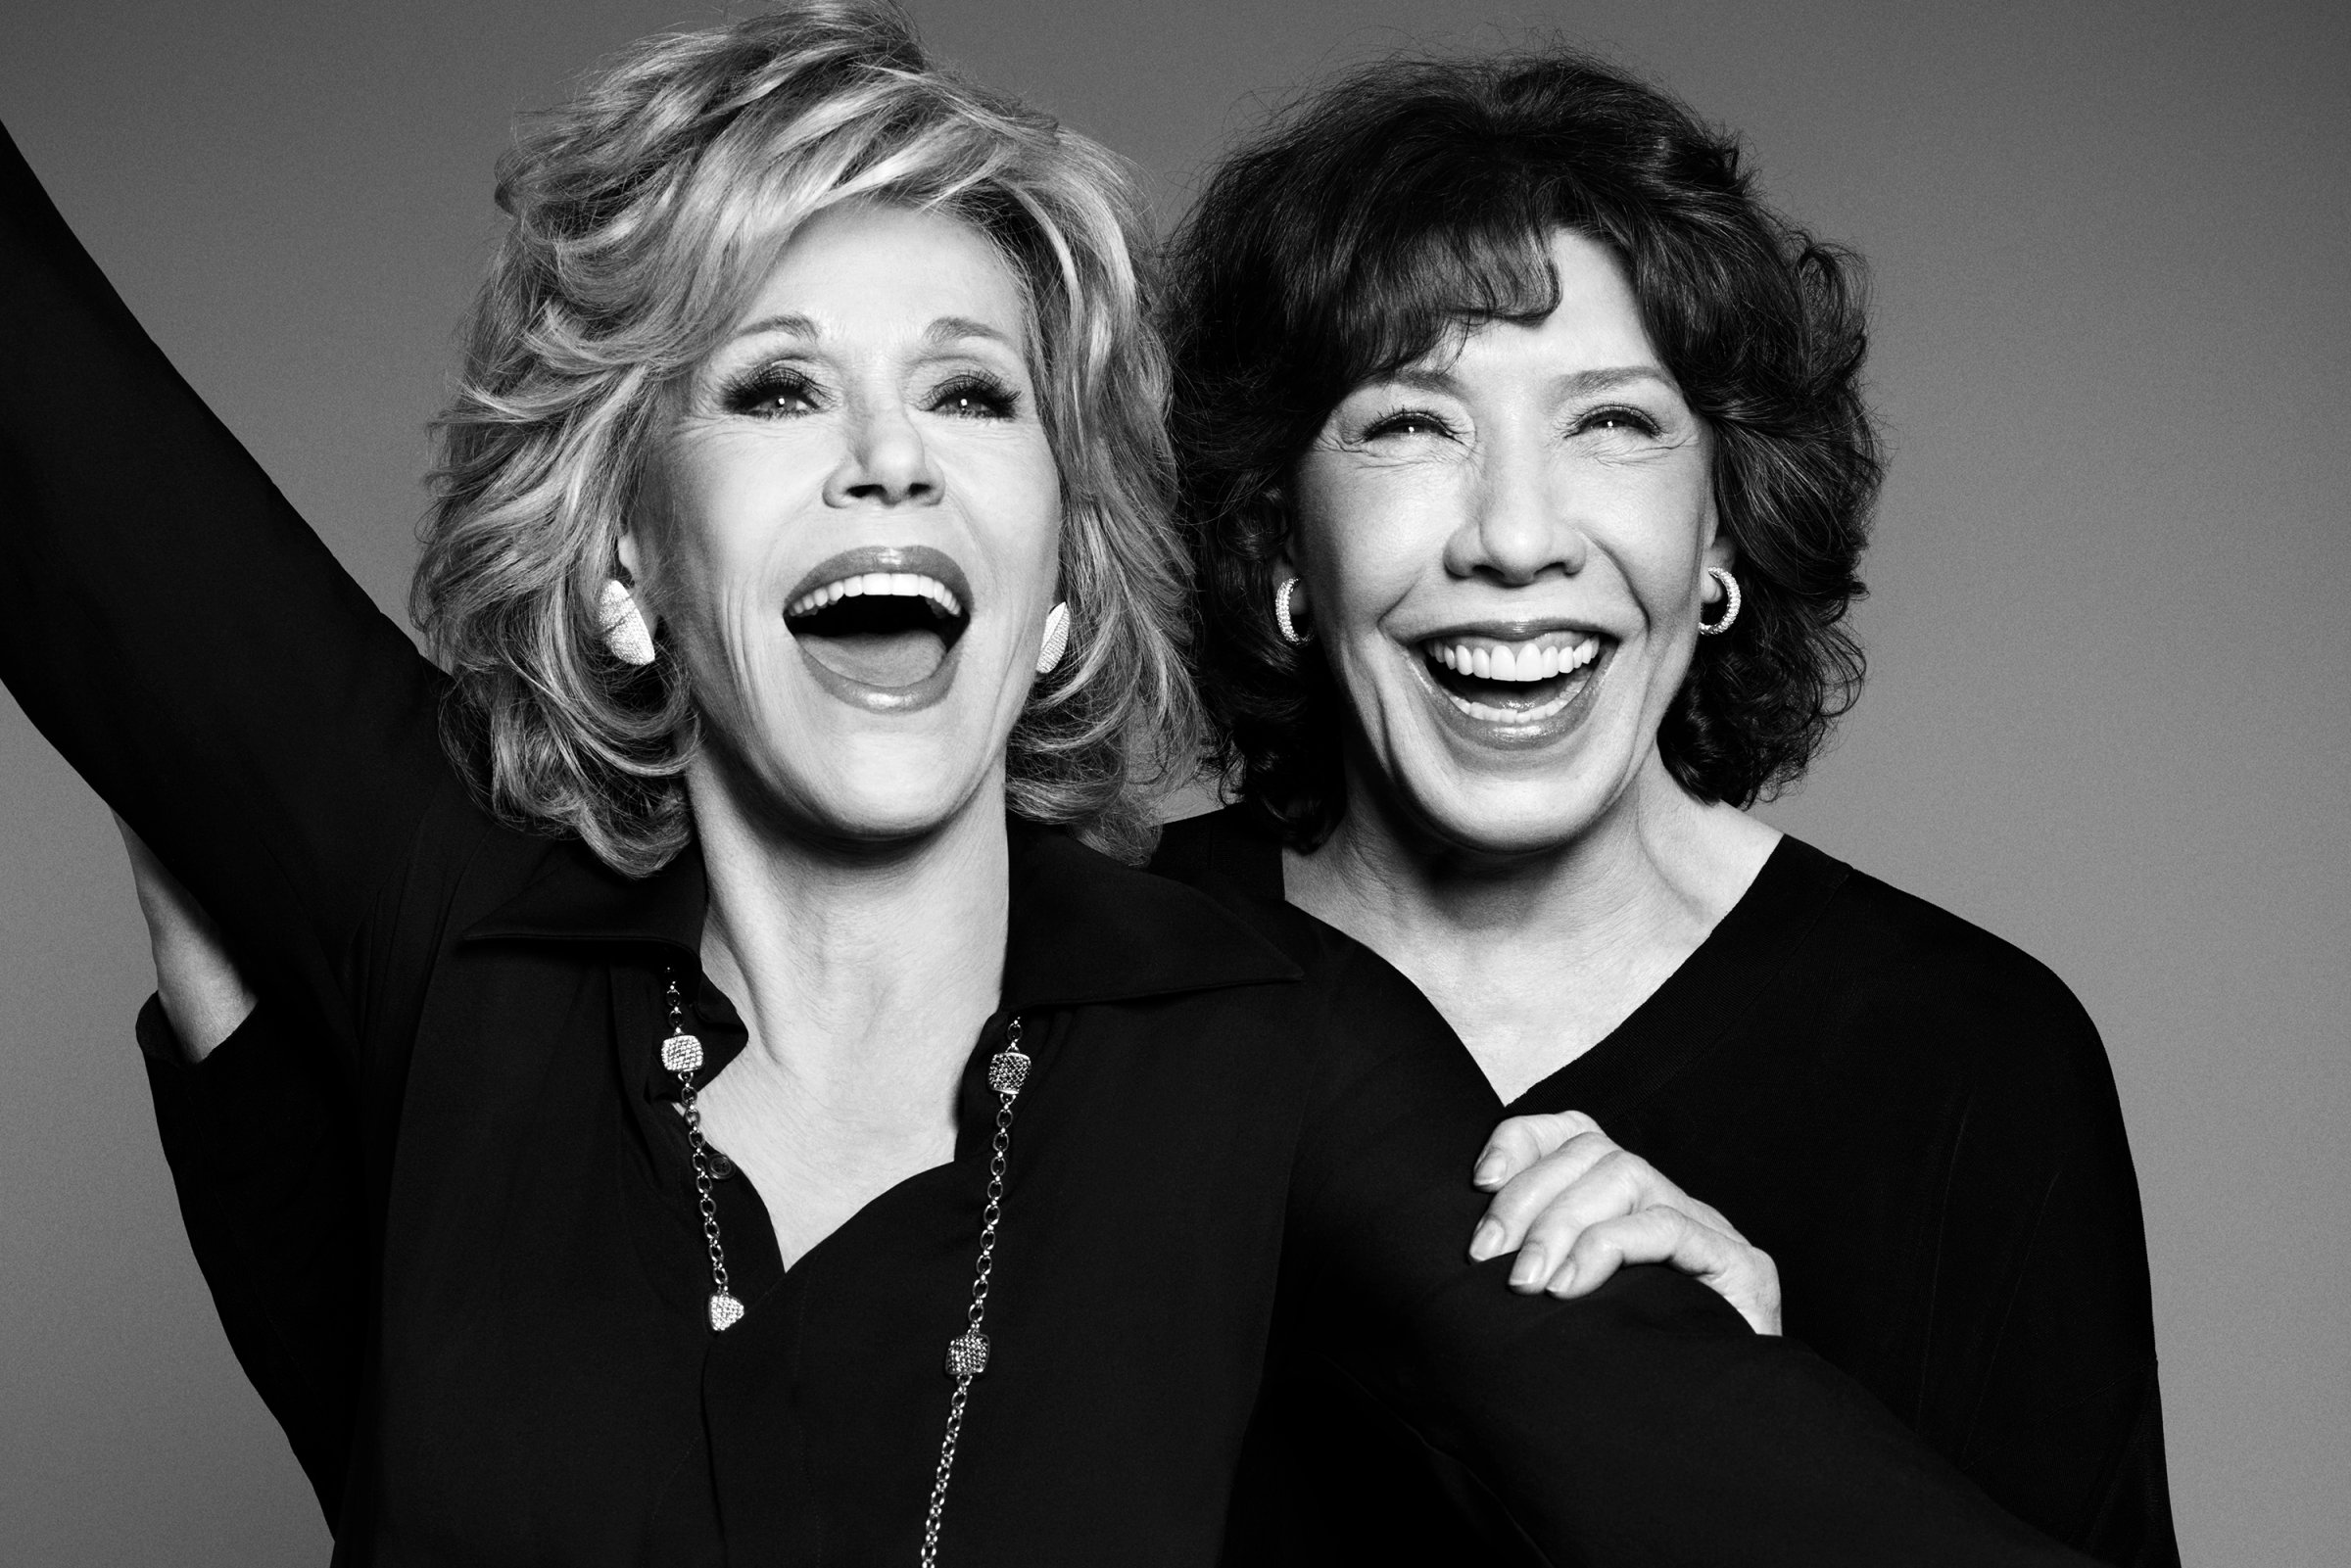 Queens of comedy: Old friends Fonda and Tomlin team up for their first project together in 35 years.